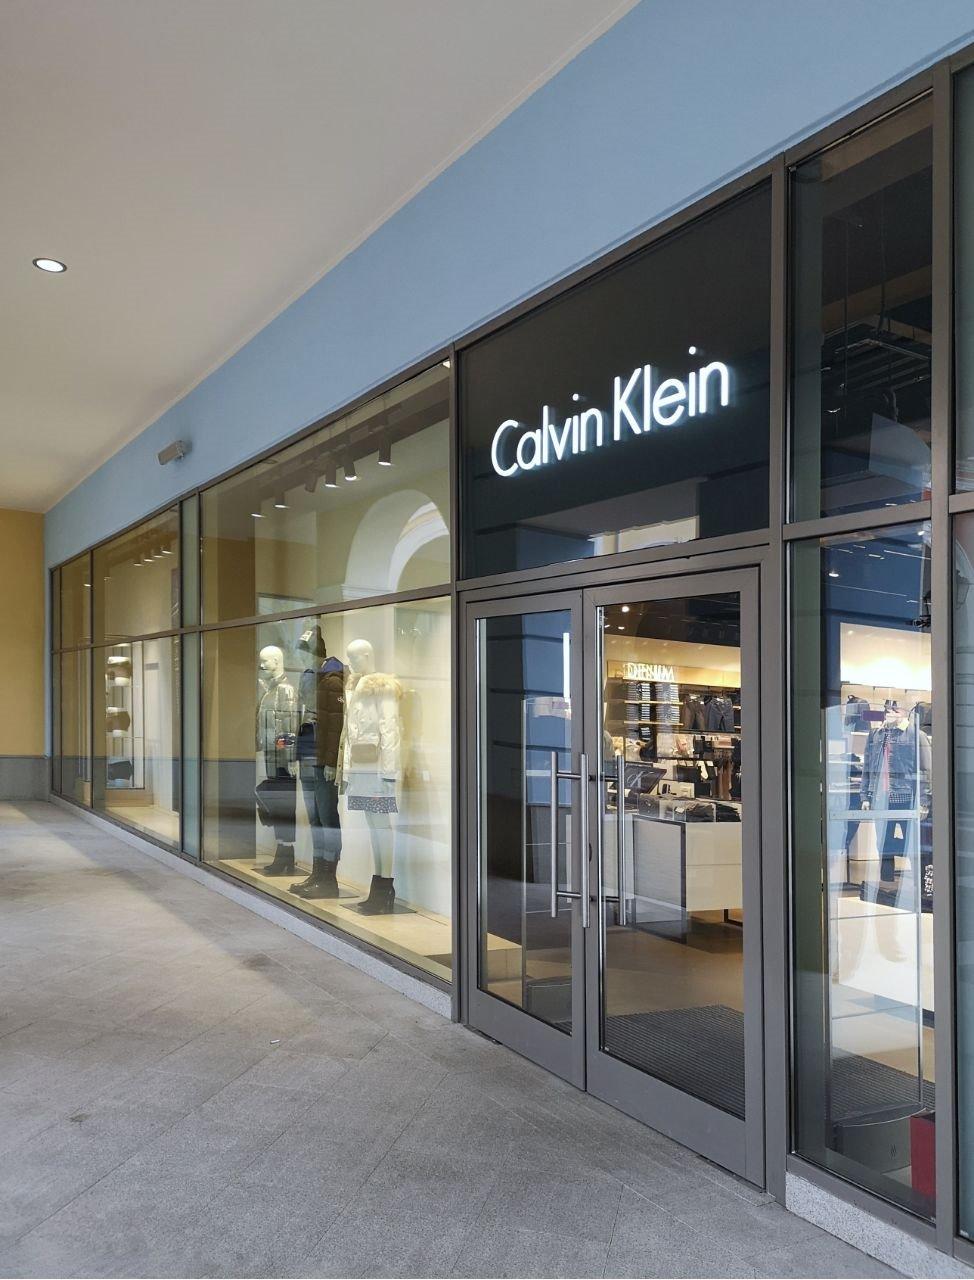 Calvin Klein Outlet - Clothing And Accessories in Saint Petersburg  (address, schedule, reviews, TEL: 88123842...) - Infobel